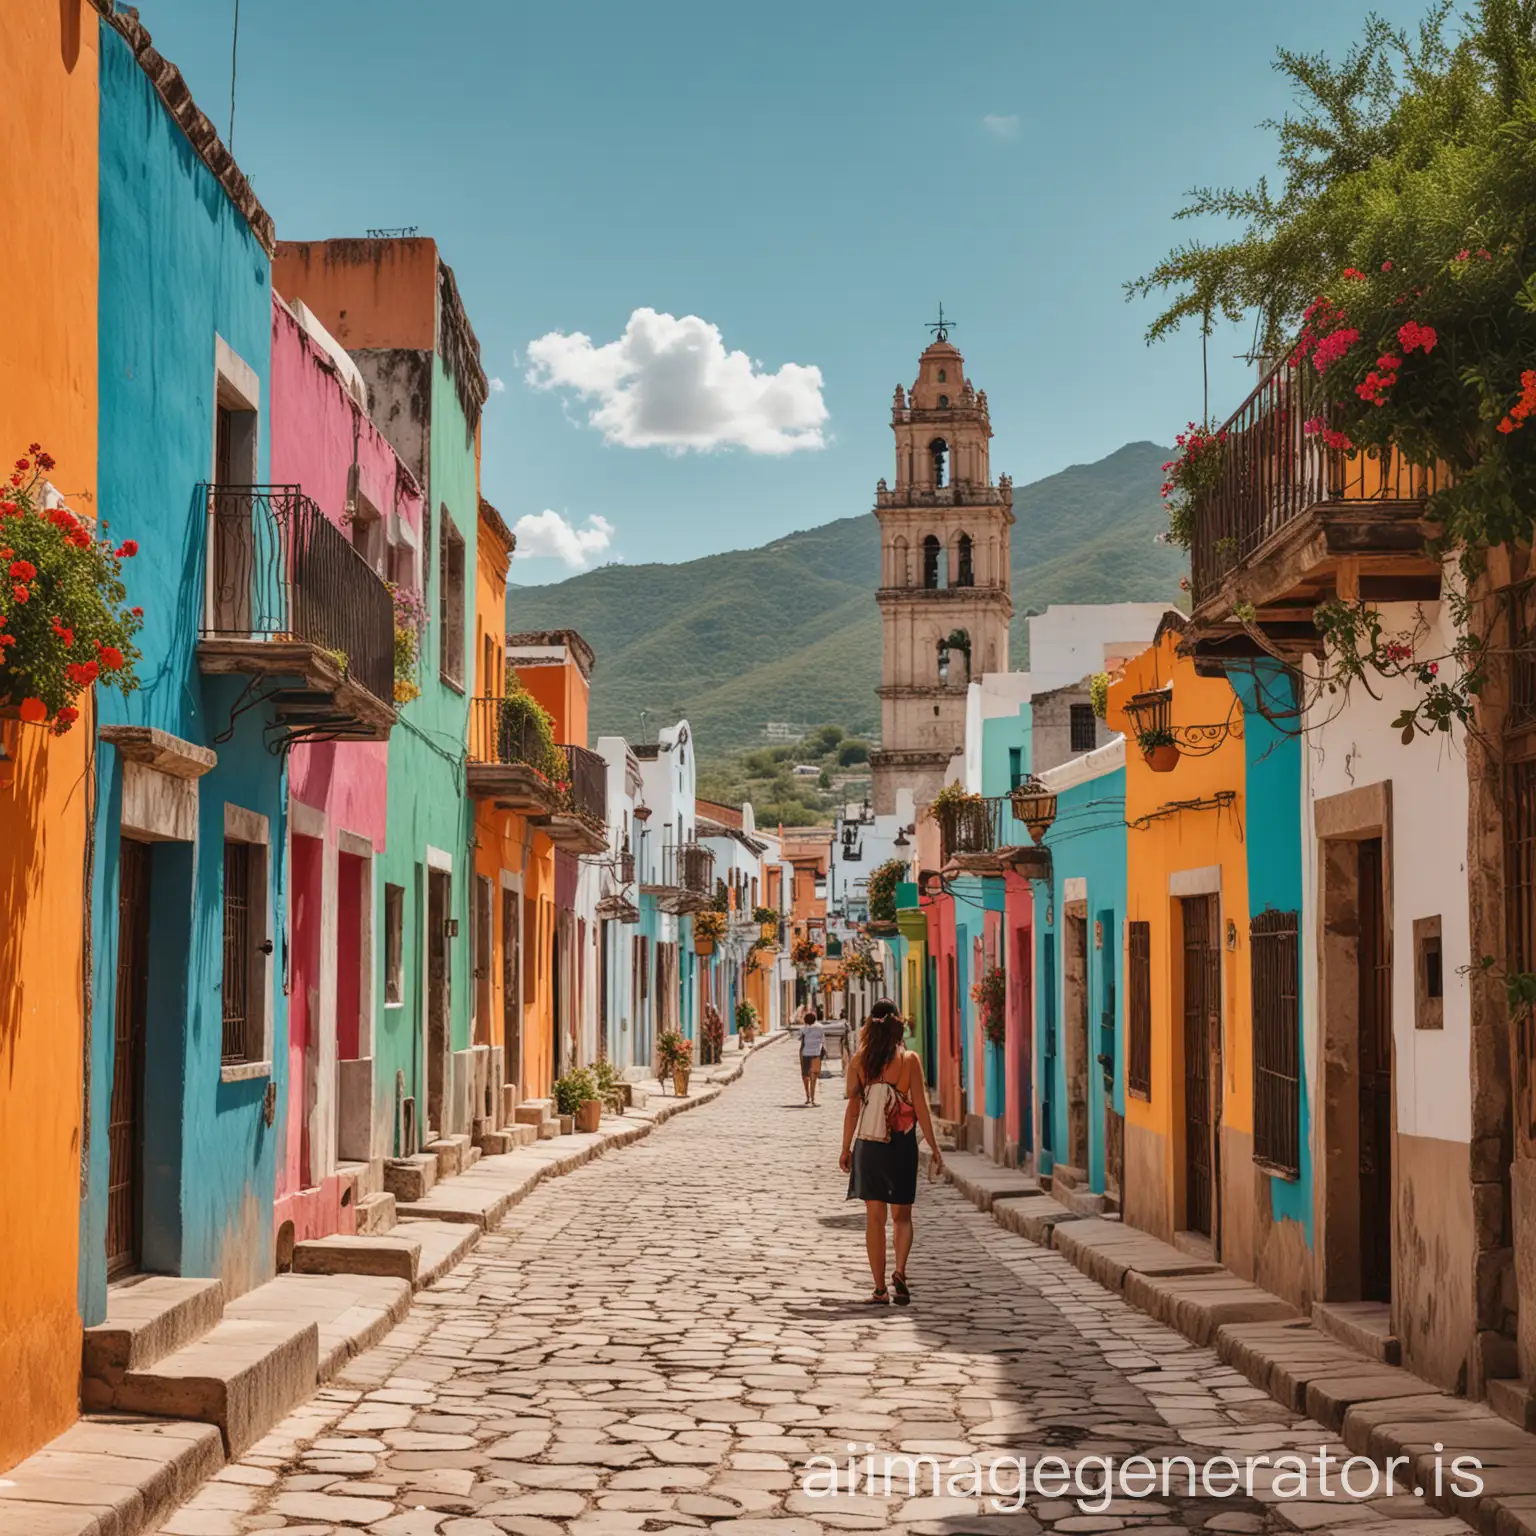 image for an infographic on the least crowded and most affordable towns to visit in mexico include bright colors and imply relaxation activities